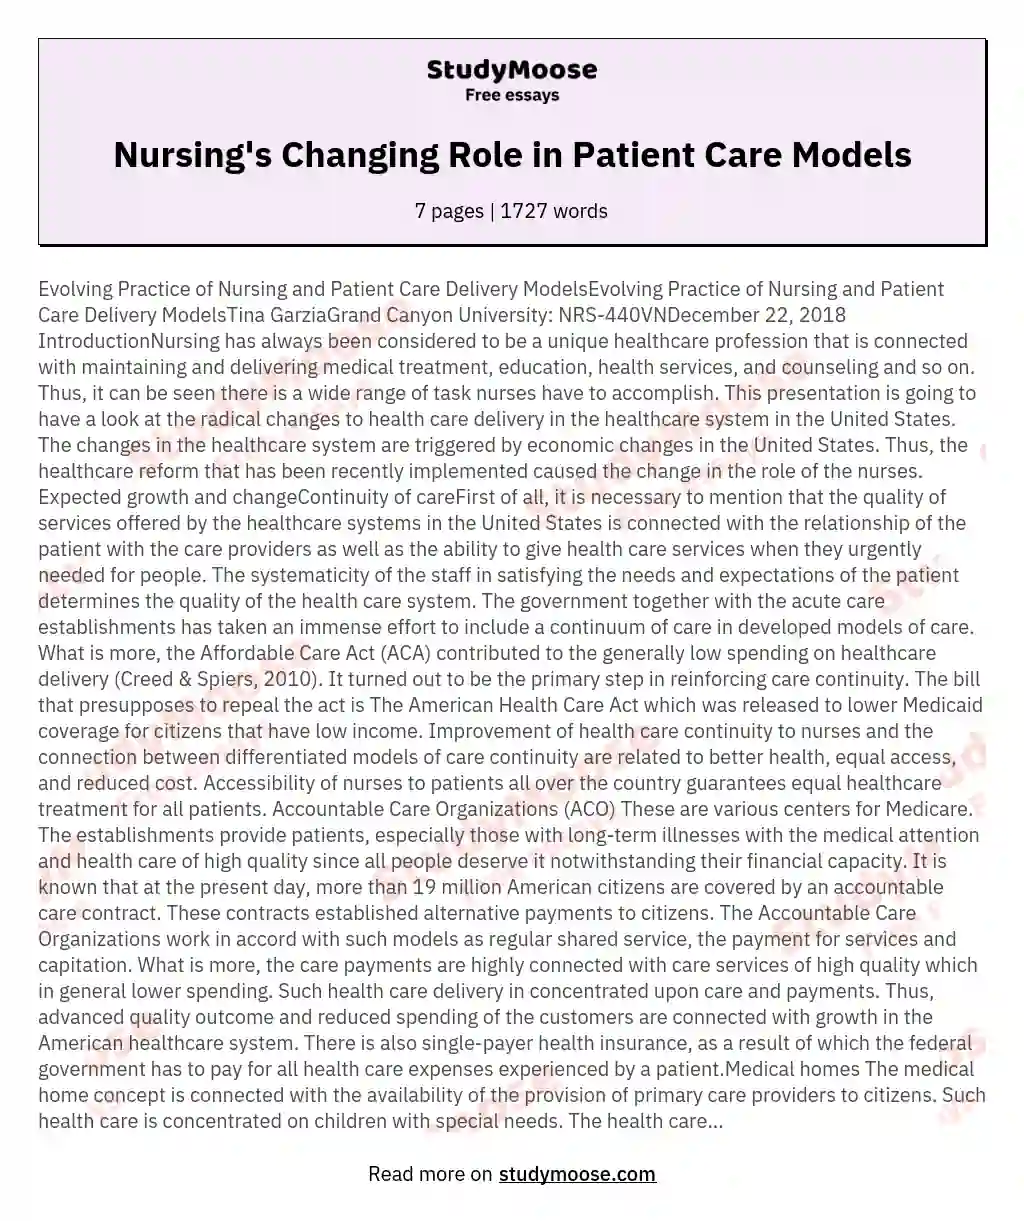 Evolving Practice of Nursing and Patient Care Delivery ModelsEvolving Practice of Nursing